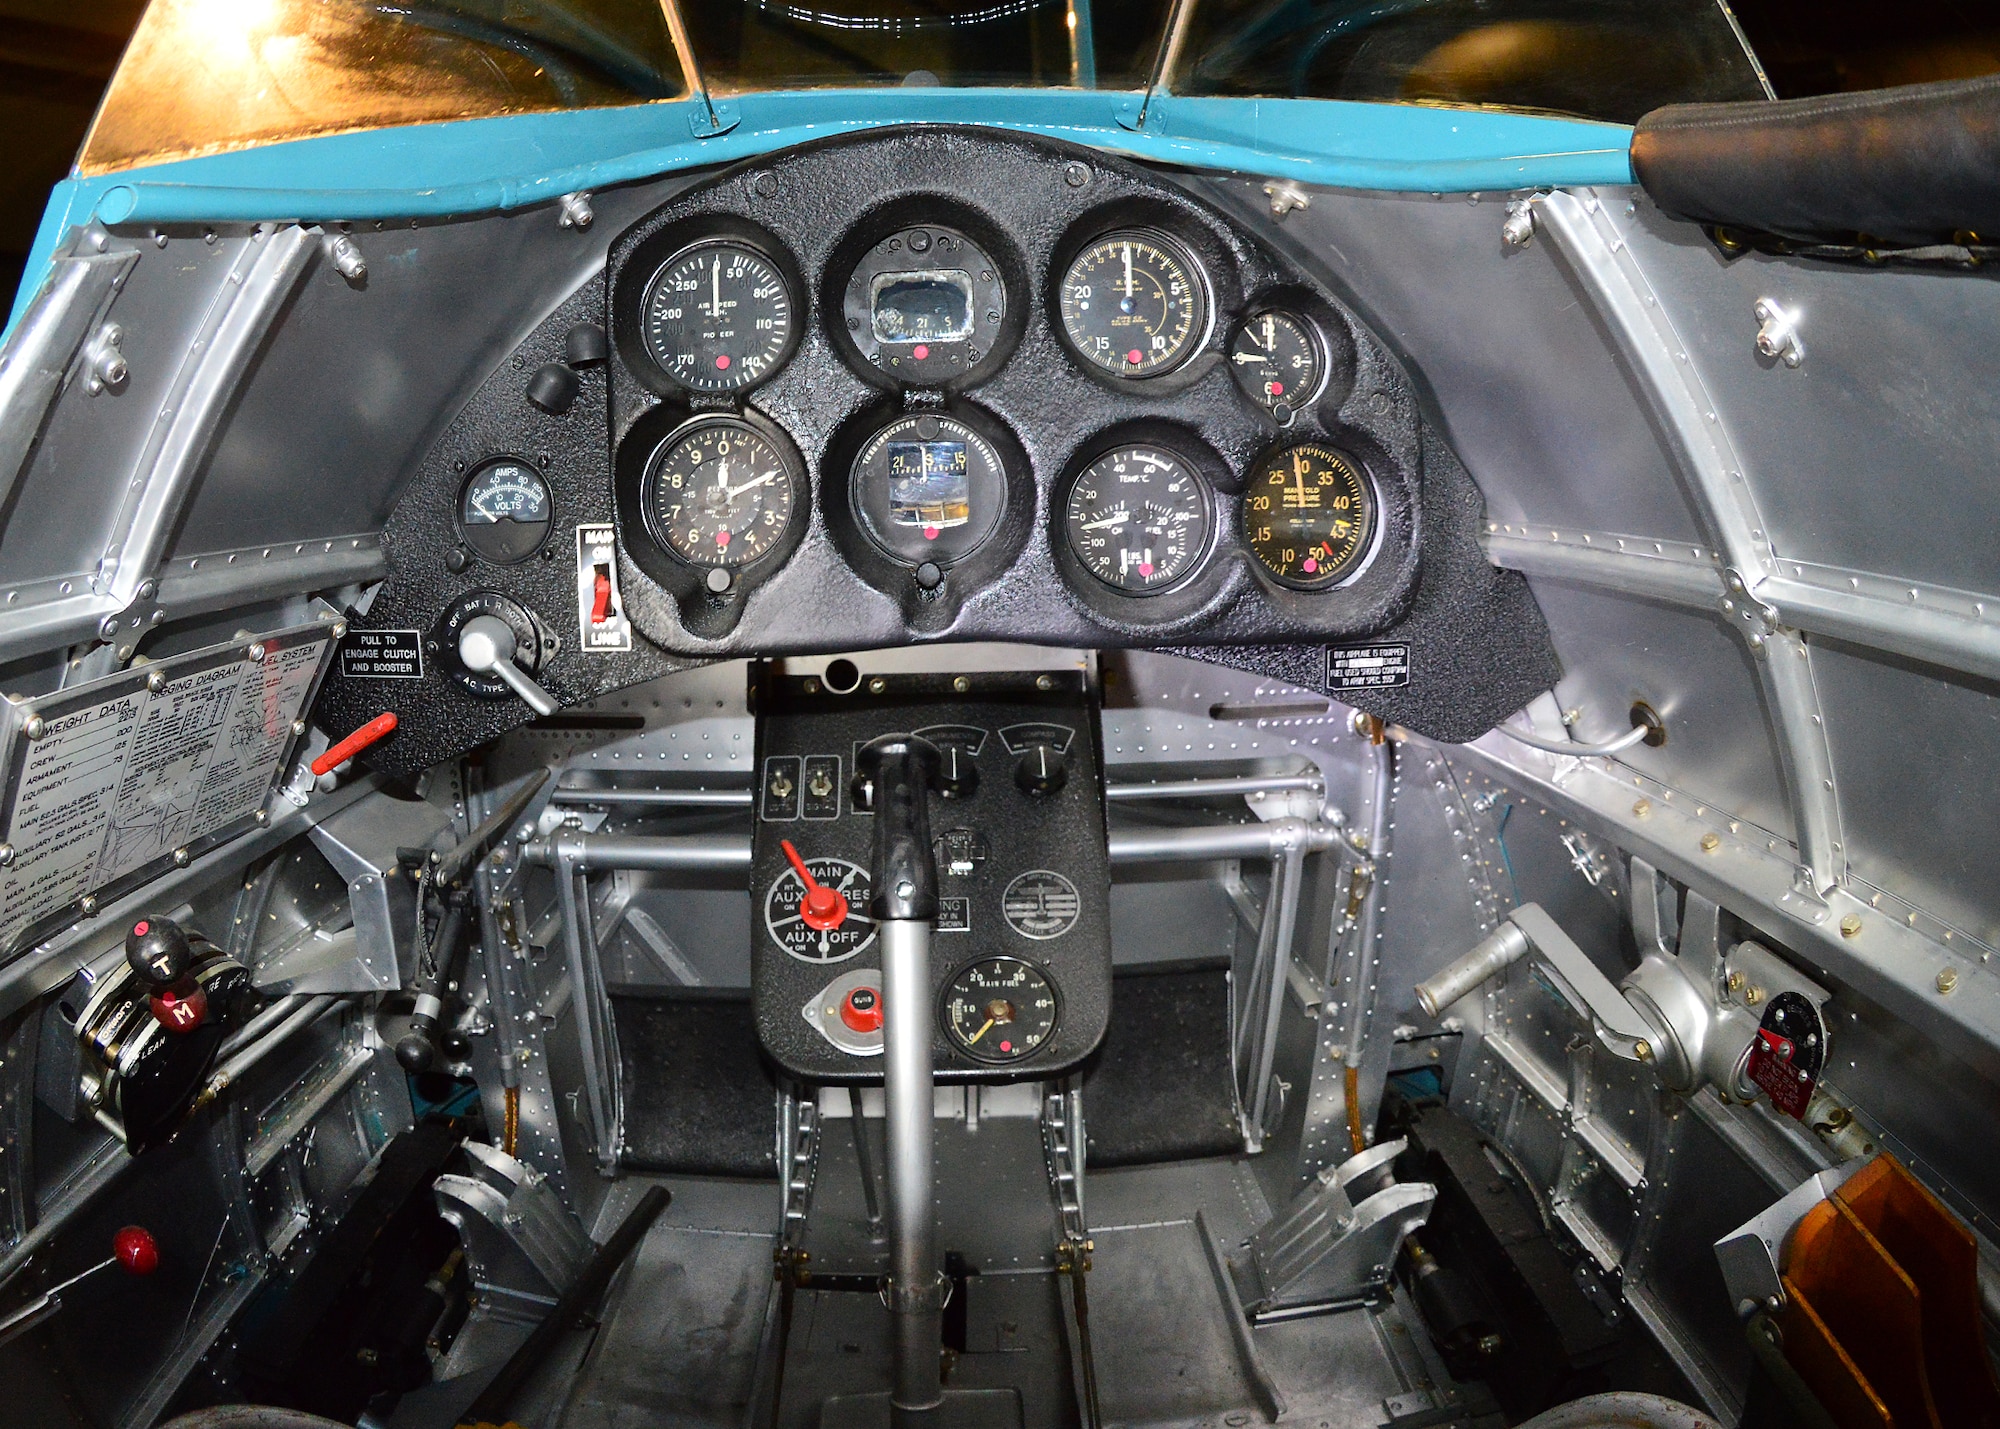 DAYTON, Ohio -- Boeing P-26A cockpit in the Early Years Gallery at the National Museum of the United States Air Force. (U.S. Air Force photo by Ken LaRock)